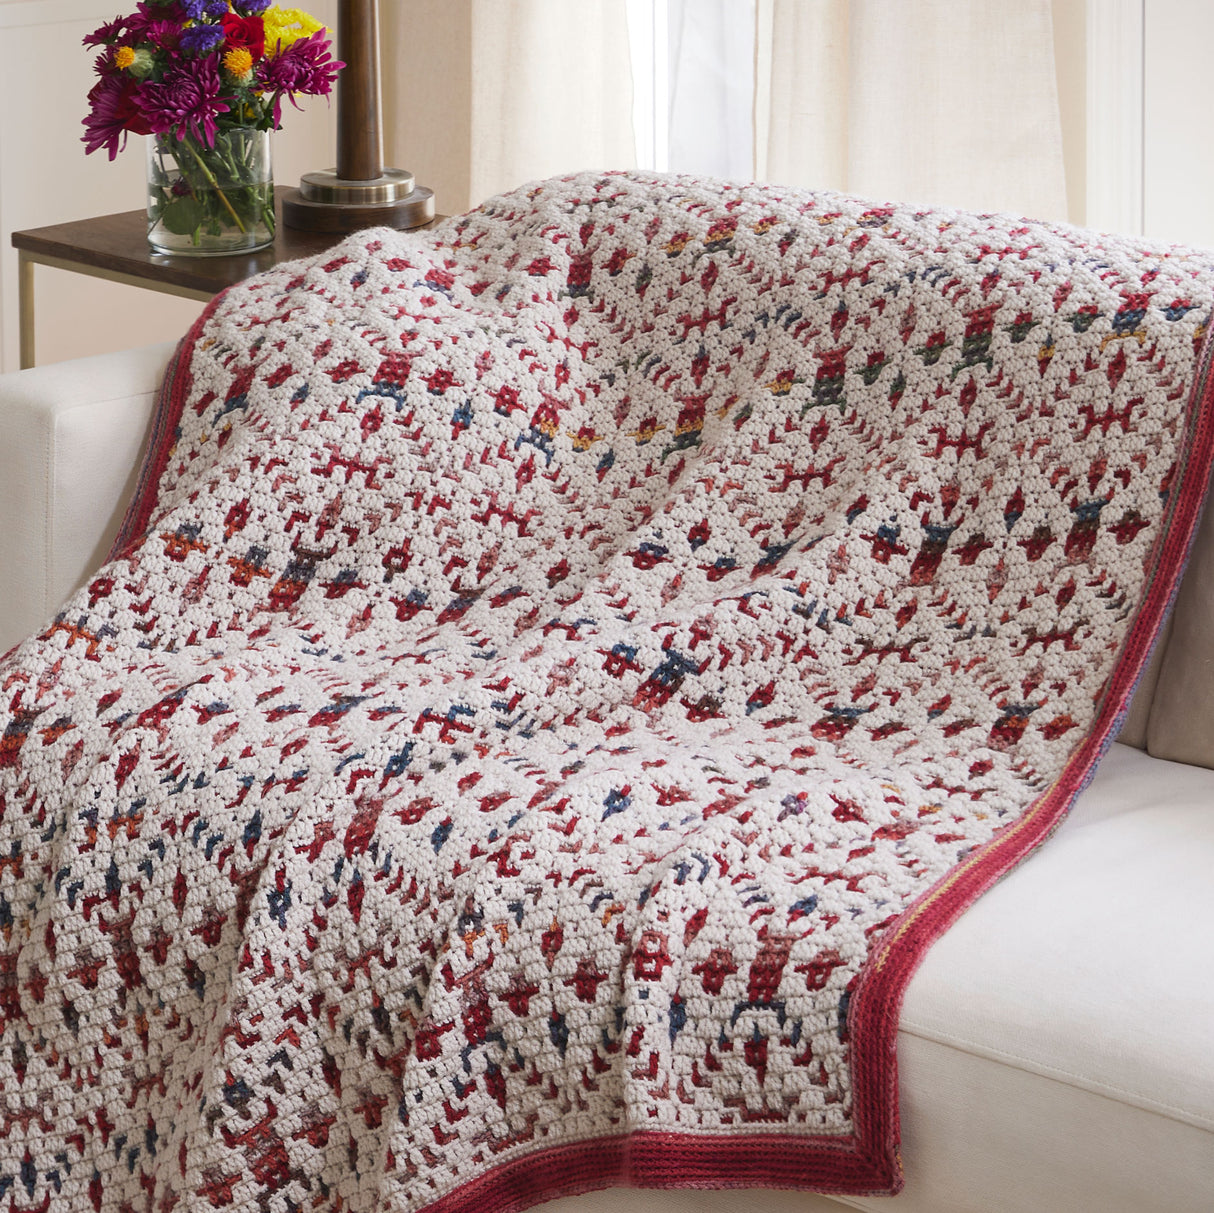 Radiance Blanket Crochet Kit Includes Pattern and Your Choice of Yarn Colors